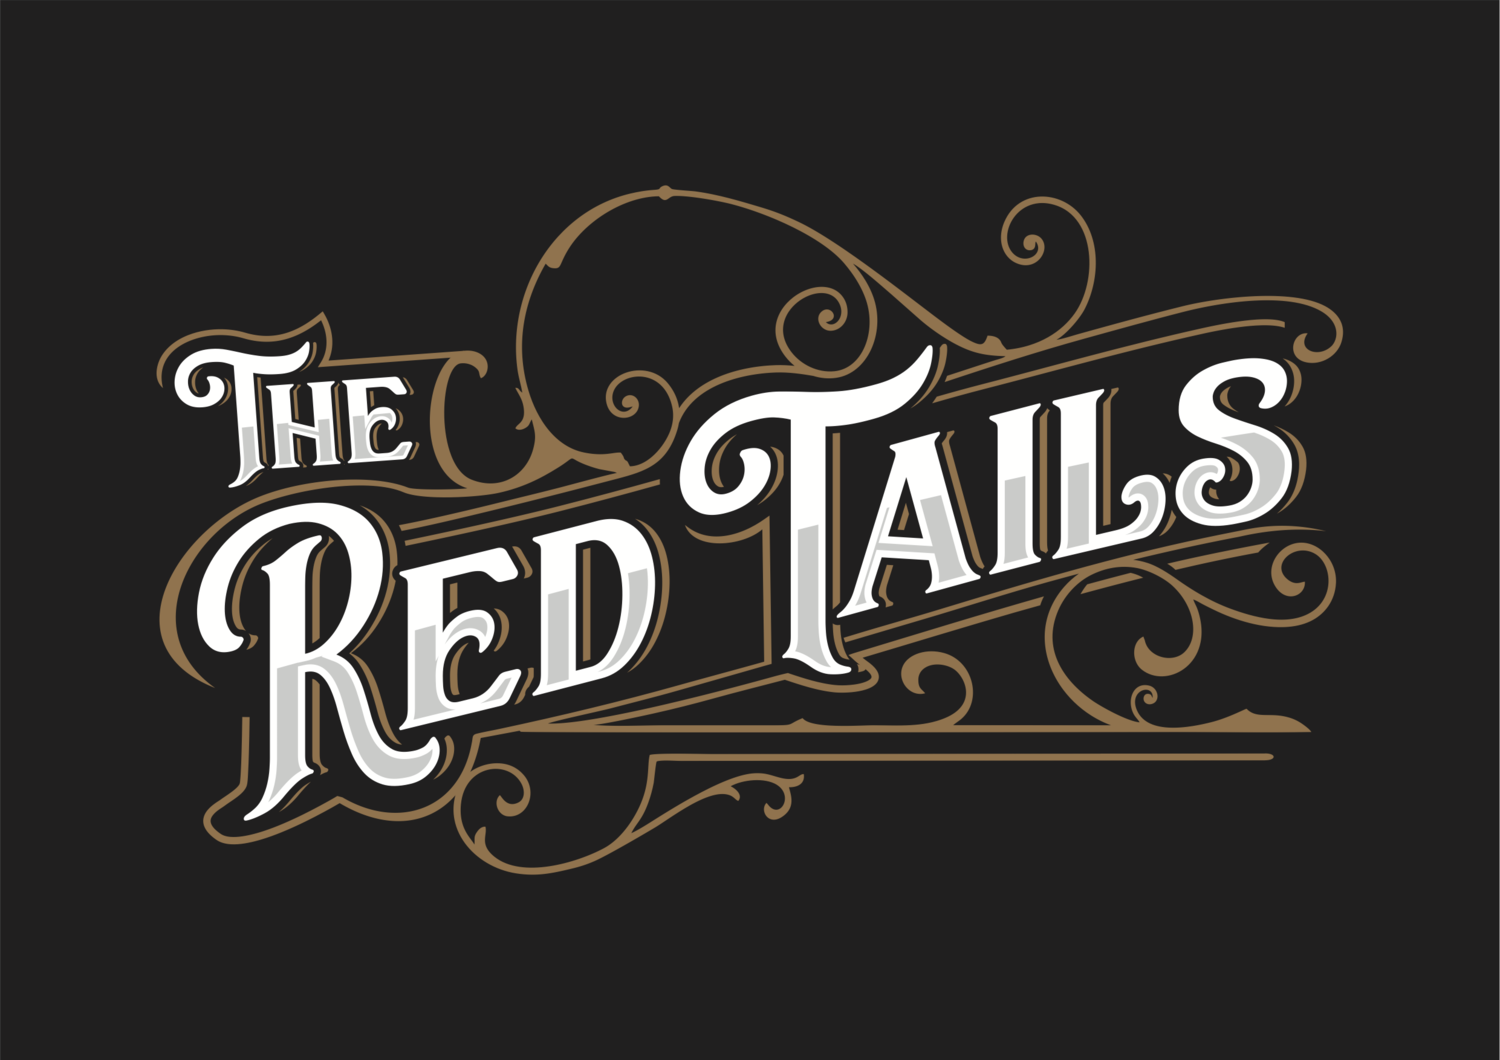 The Red Tails